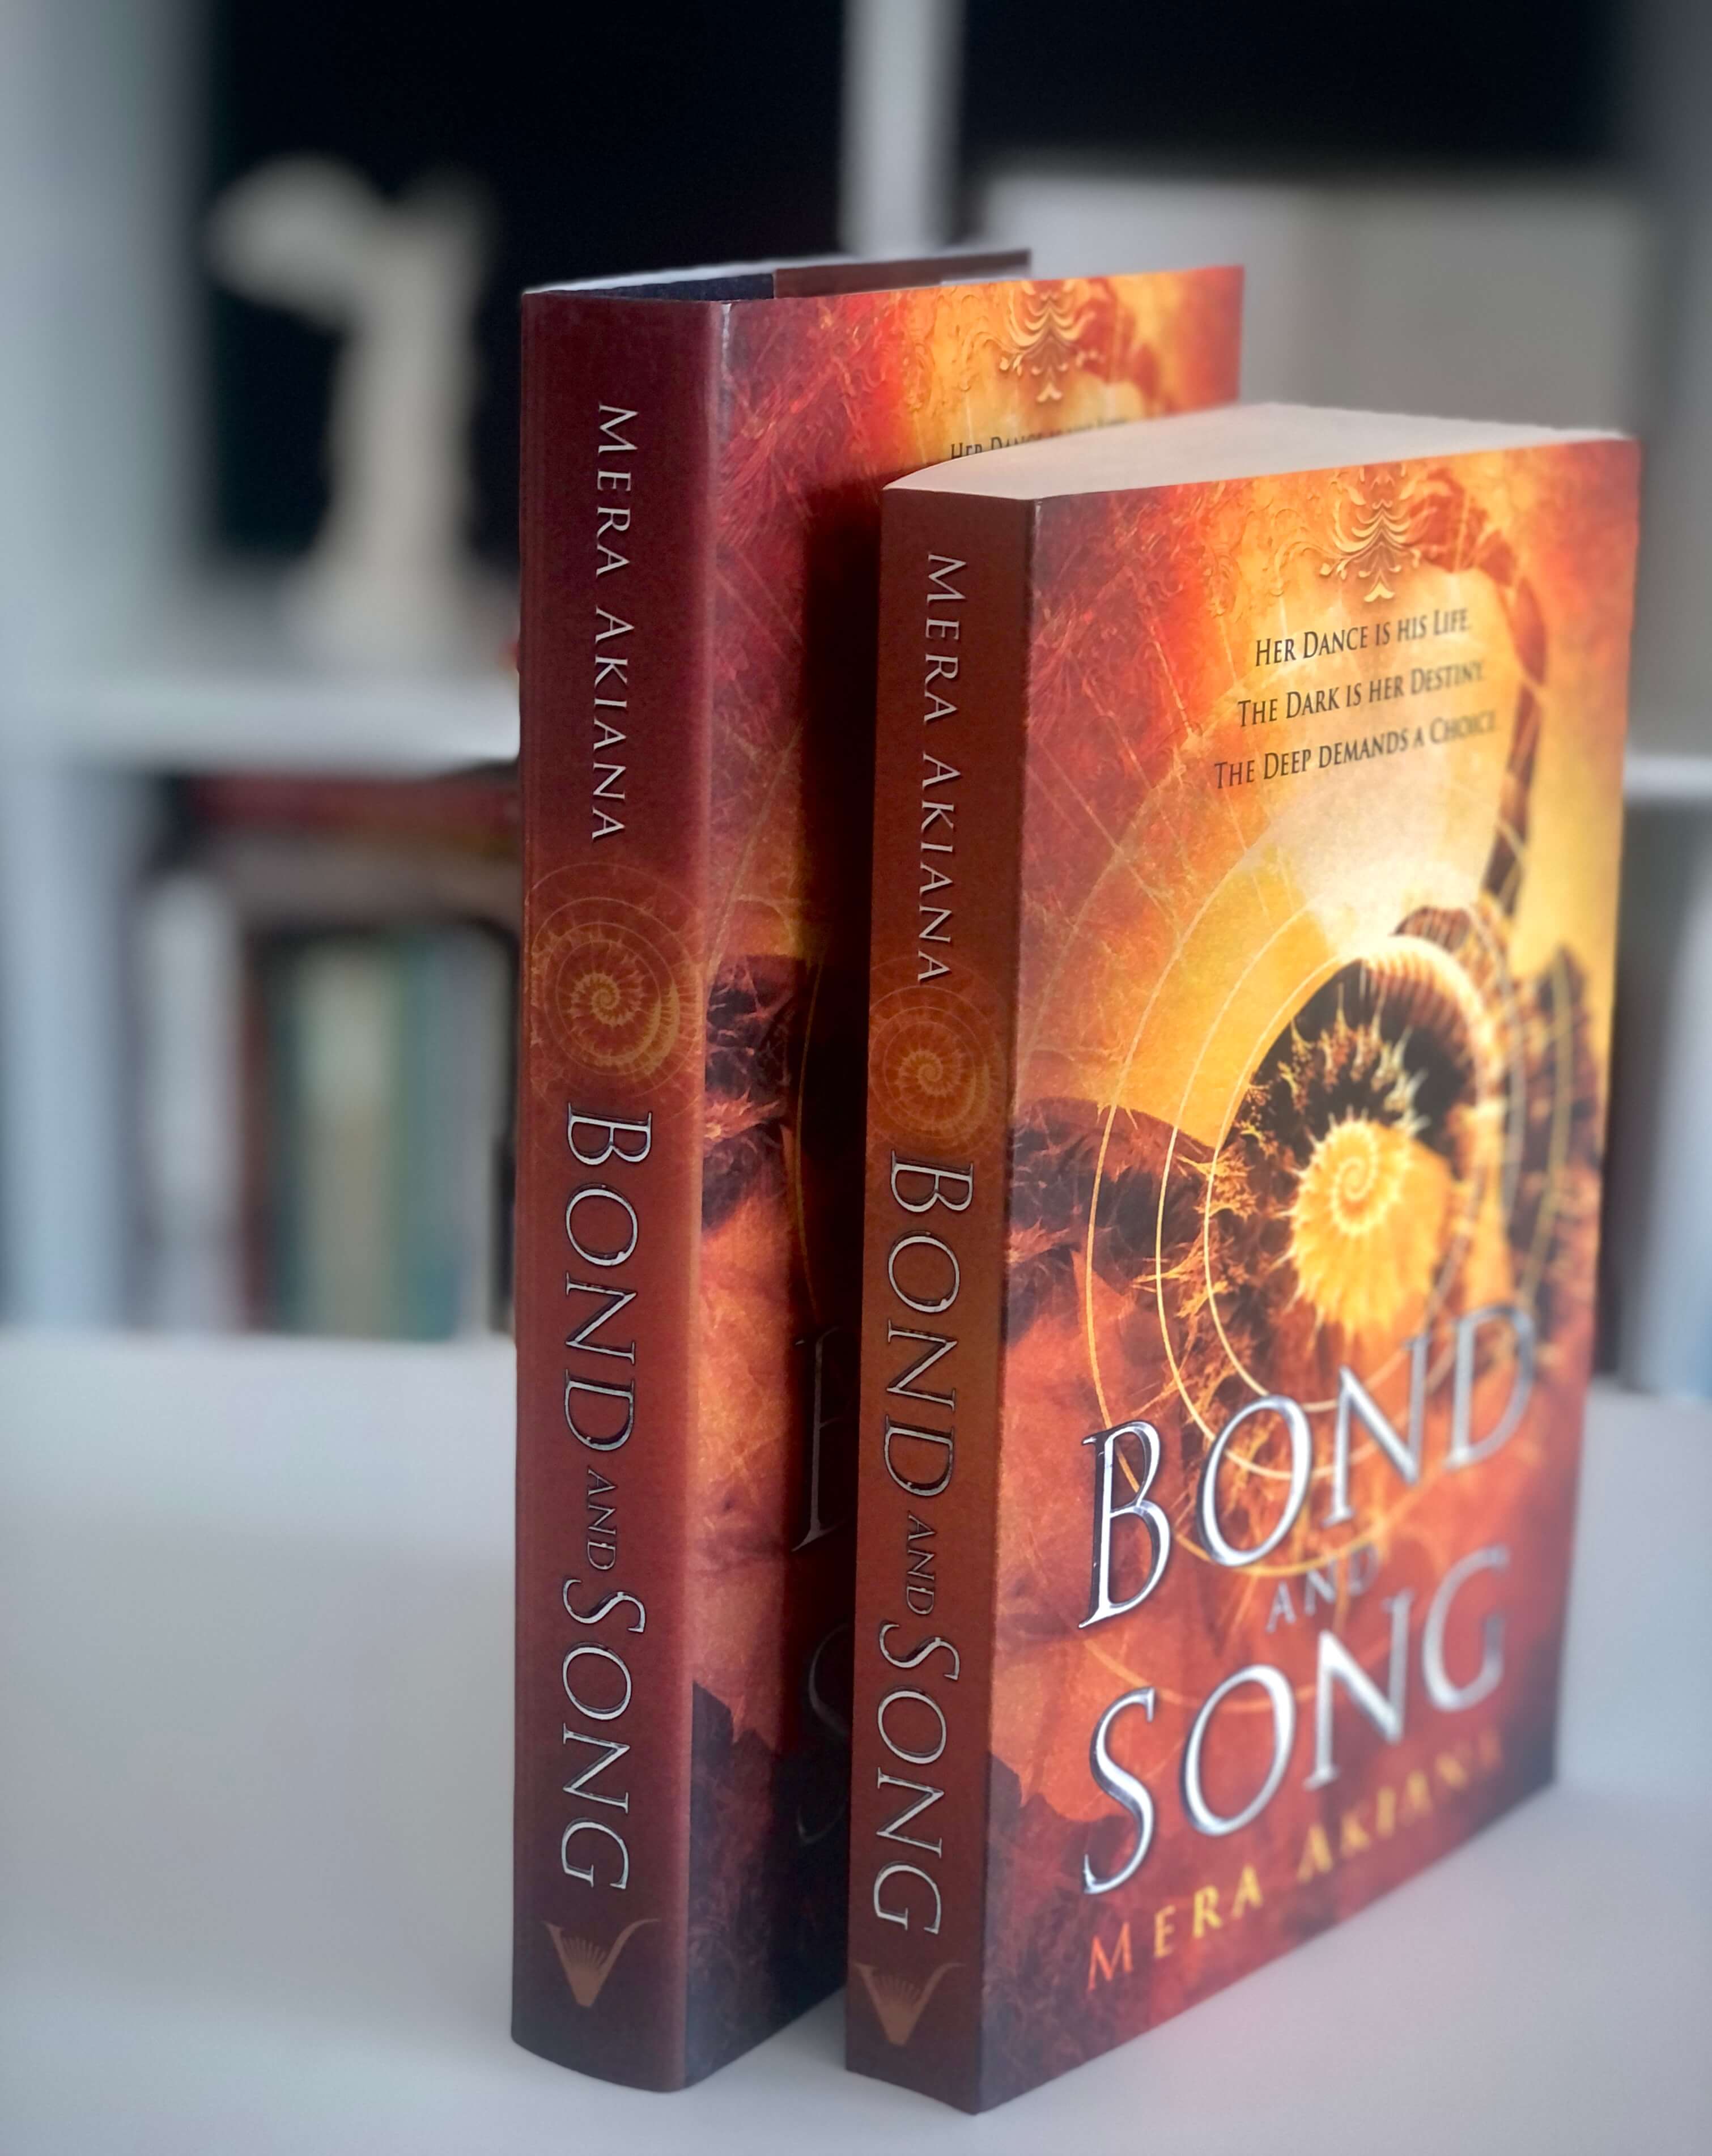 view of spines and front cover of Bond and Song paperback and hardcover next to one another